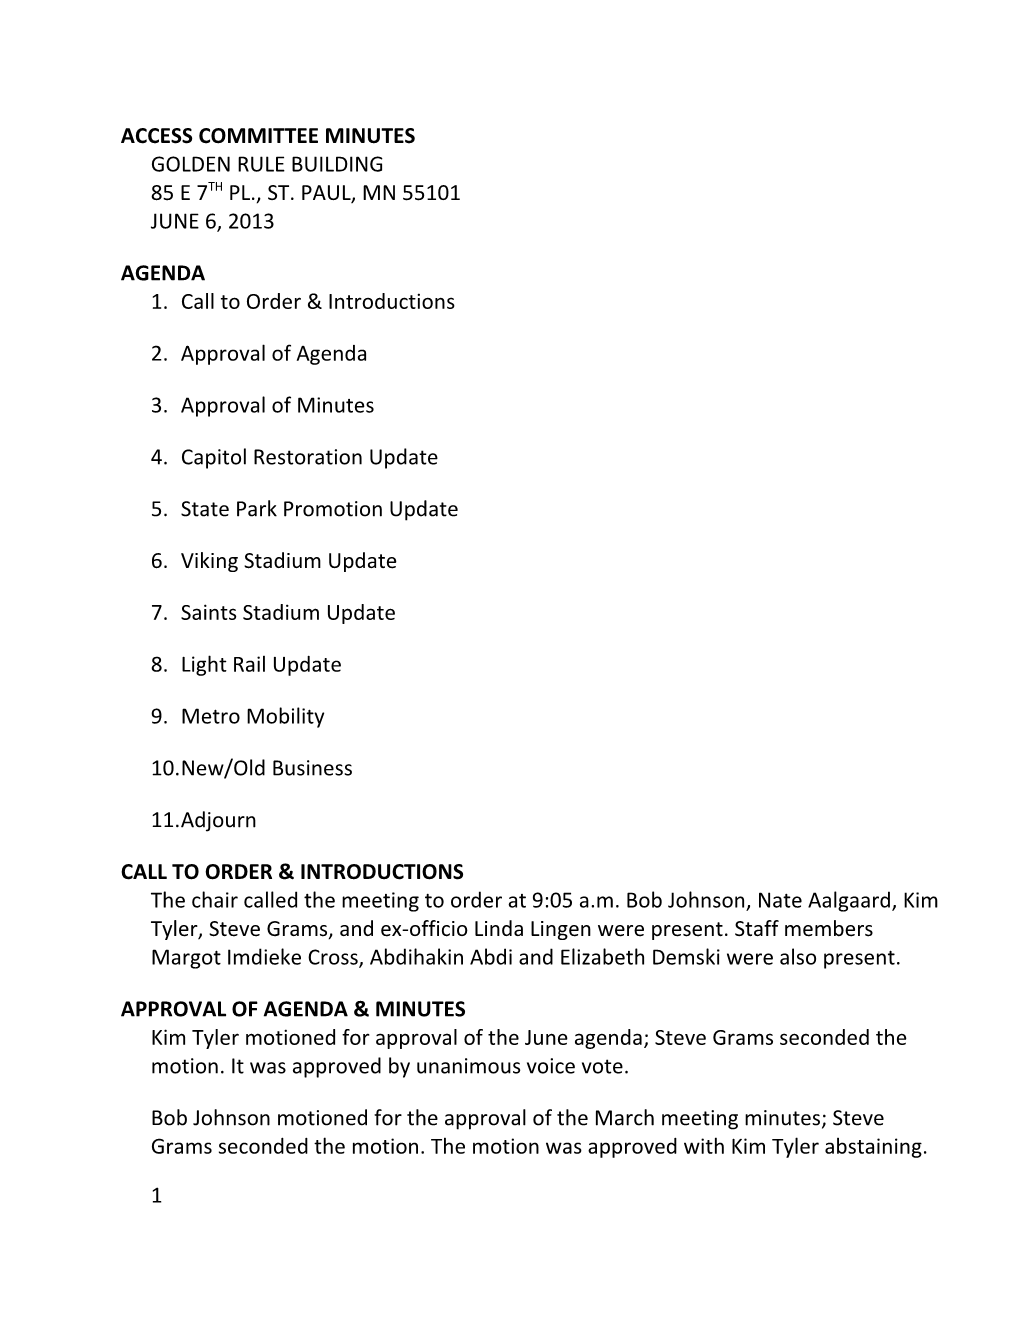 Access Committee Minutes, 6-6-13